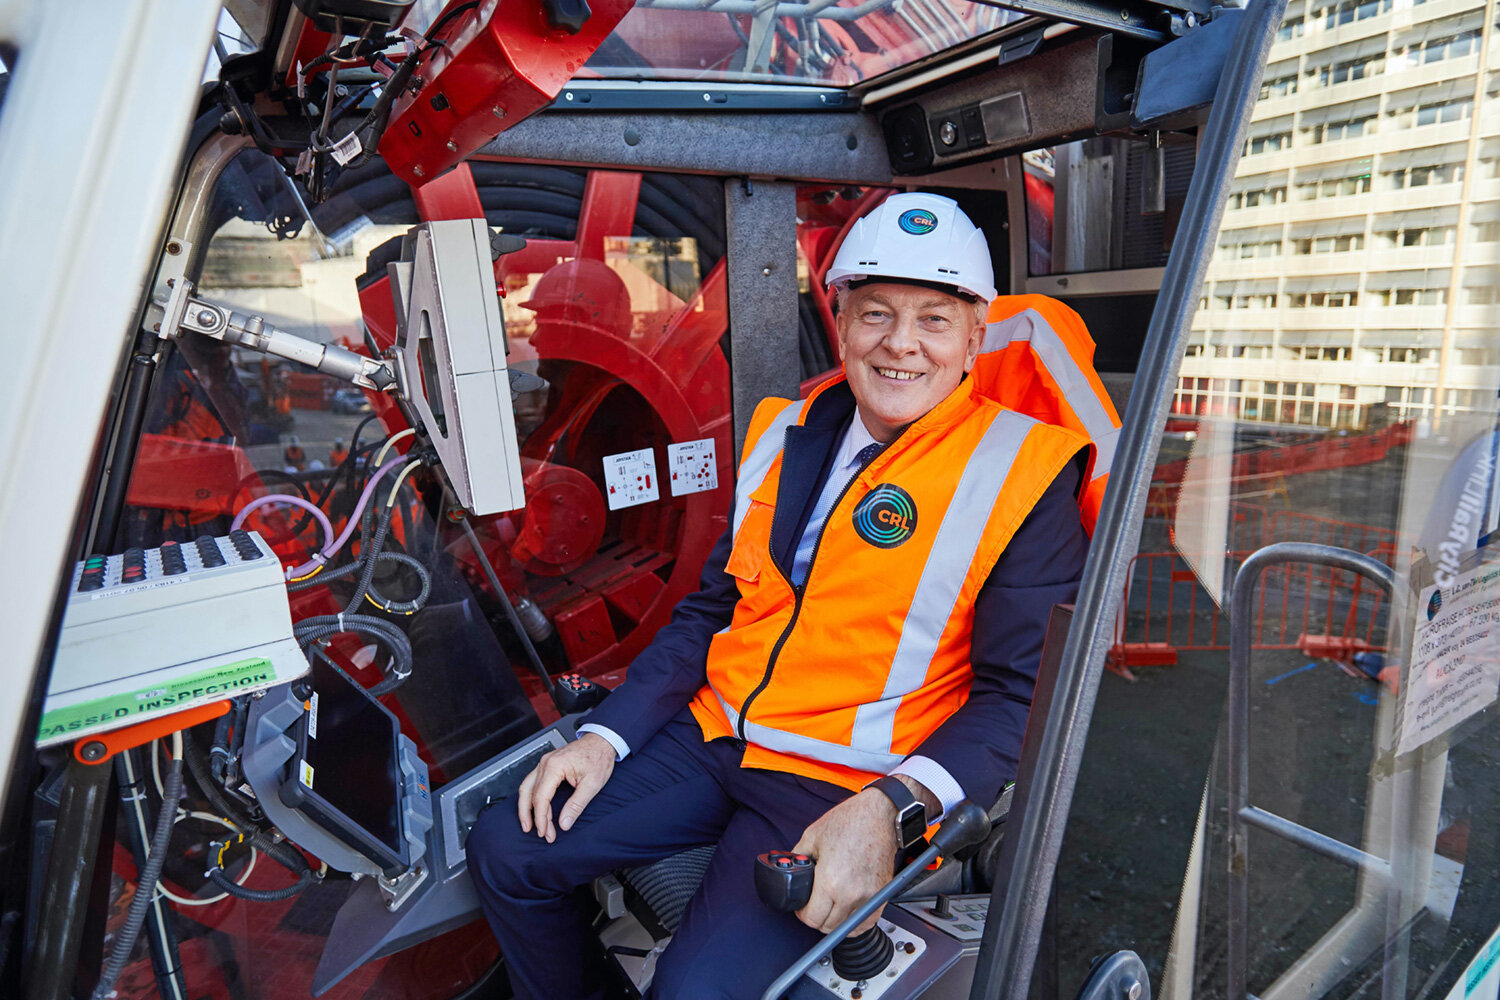 Auckland Mayor Phil Goff sat in the hot seat of the machine during the event.